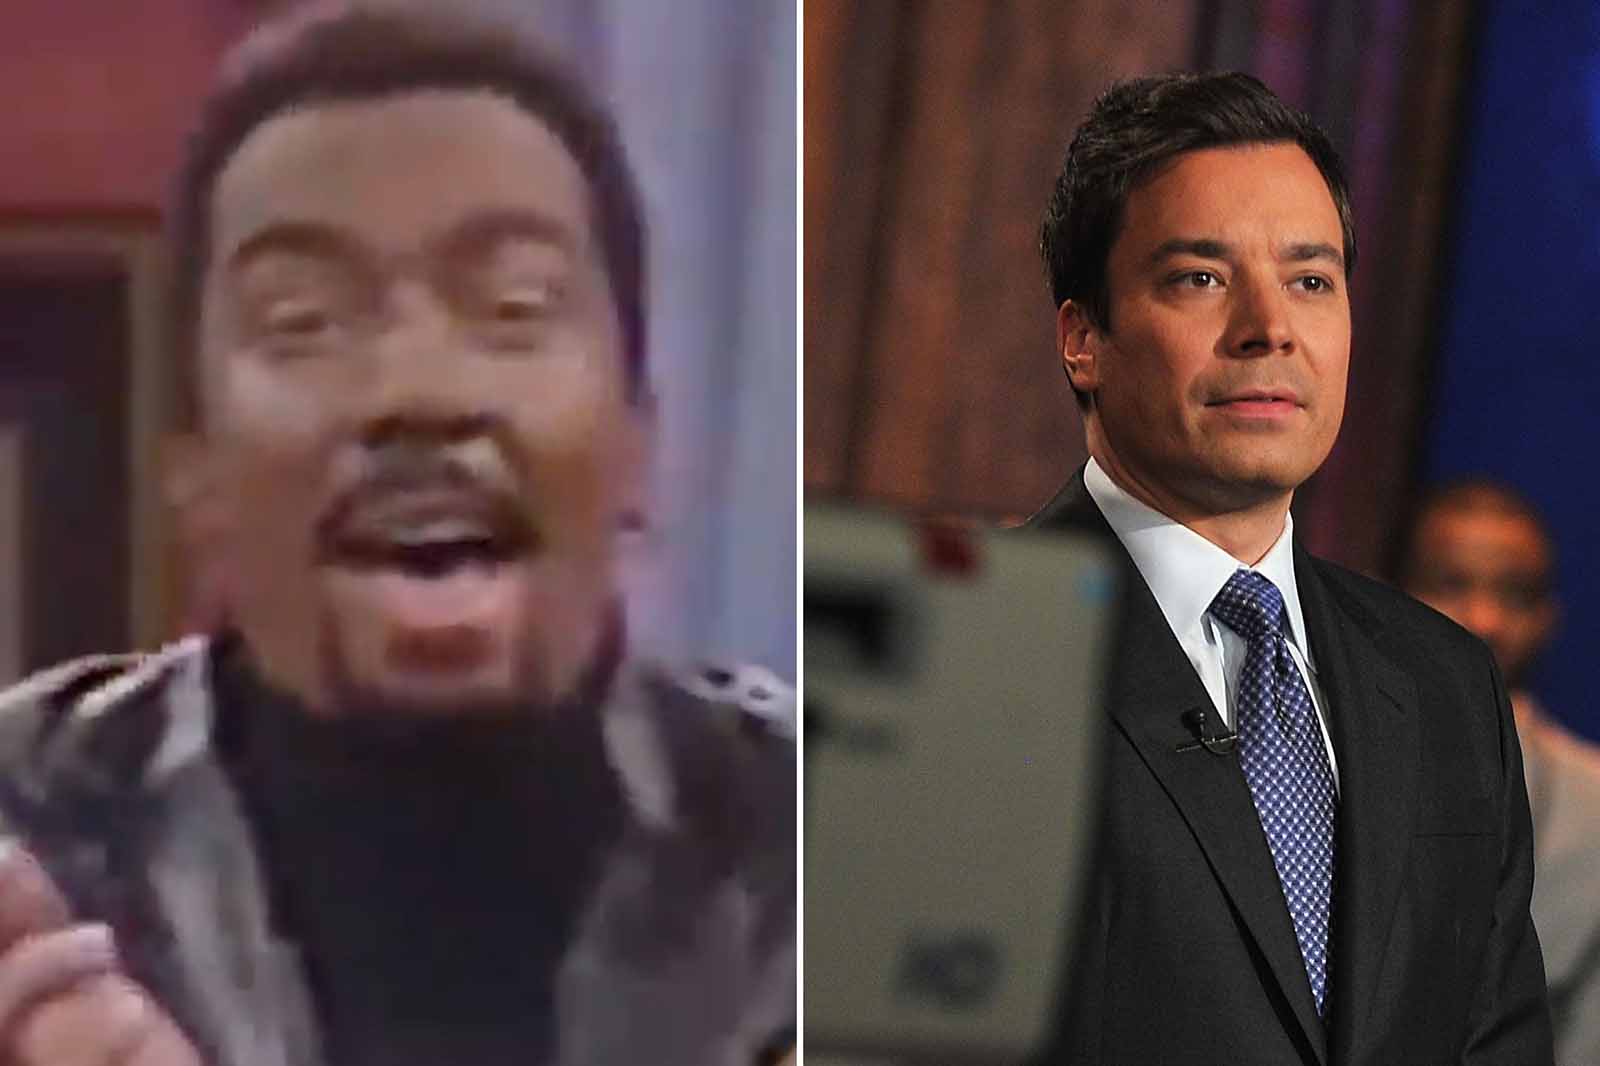 Jimmy Fallon is in hot water for doing blackface on 'SNL', but his net worth should've dropped years ago for all the stupid stuff he's done. 